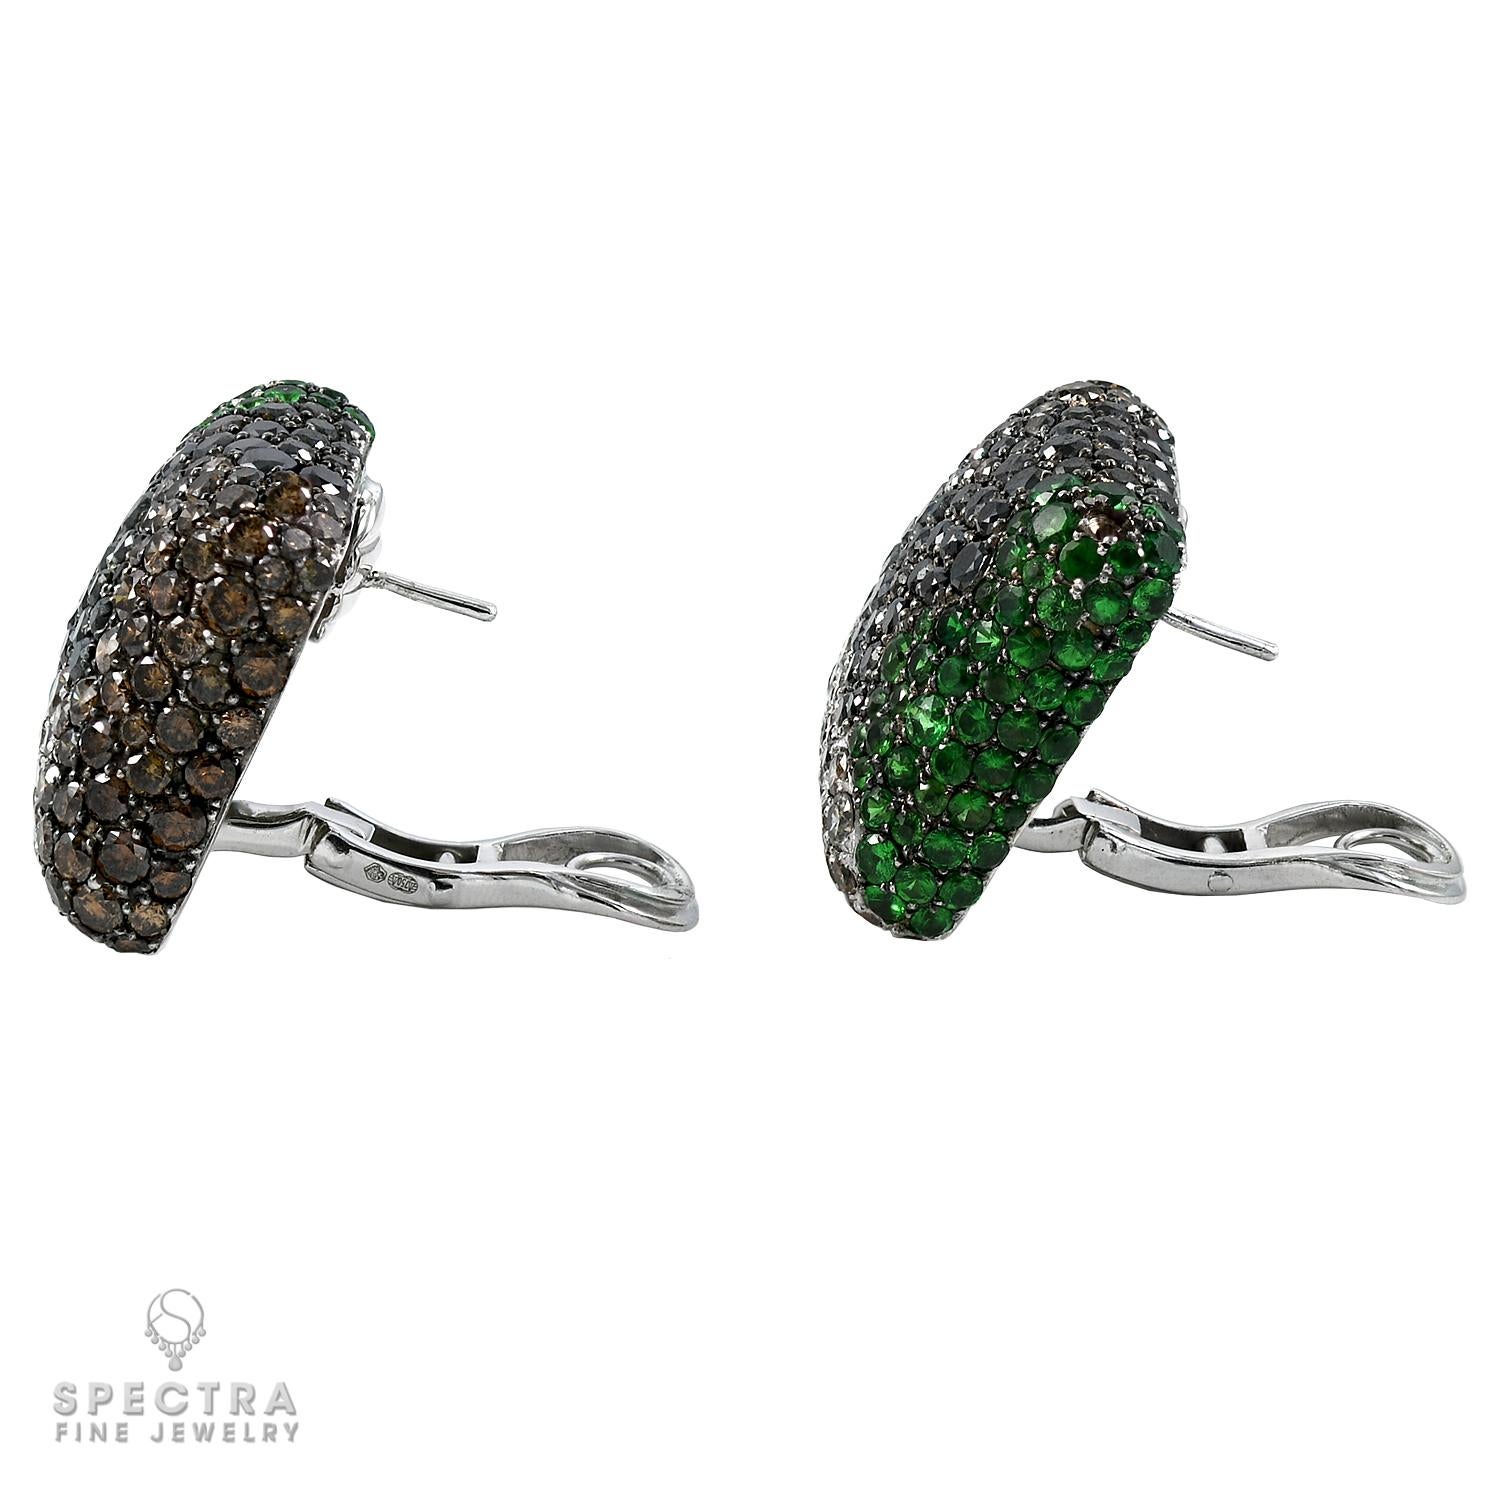 Presenting an exquisite pair of earrings crafted in 18k white gold, adorned with a mesmerizing array of multicolored round diamonds, totaling around 10.68 carats. 

Additionally, the earrings feature Tsavorites, with a combined weight of